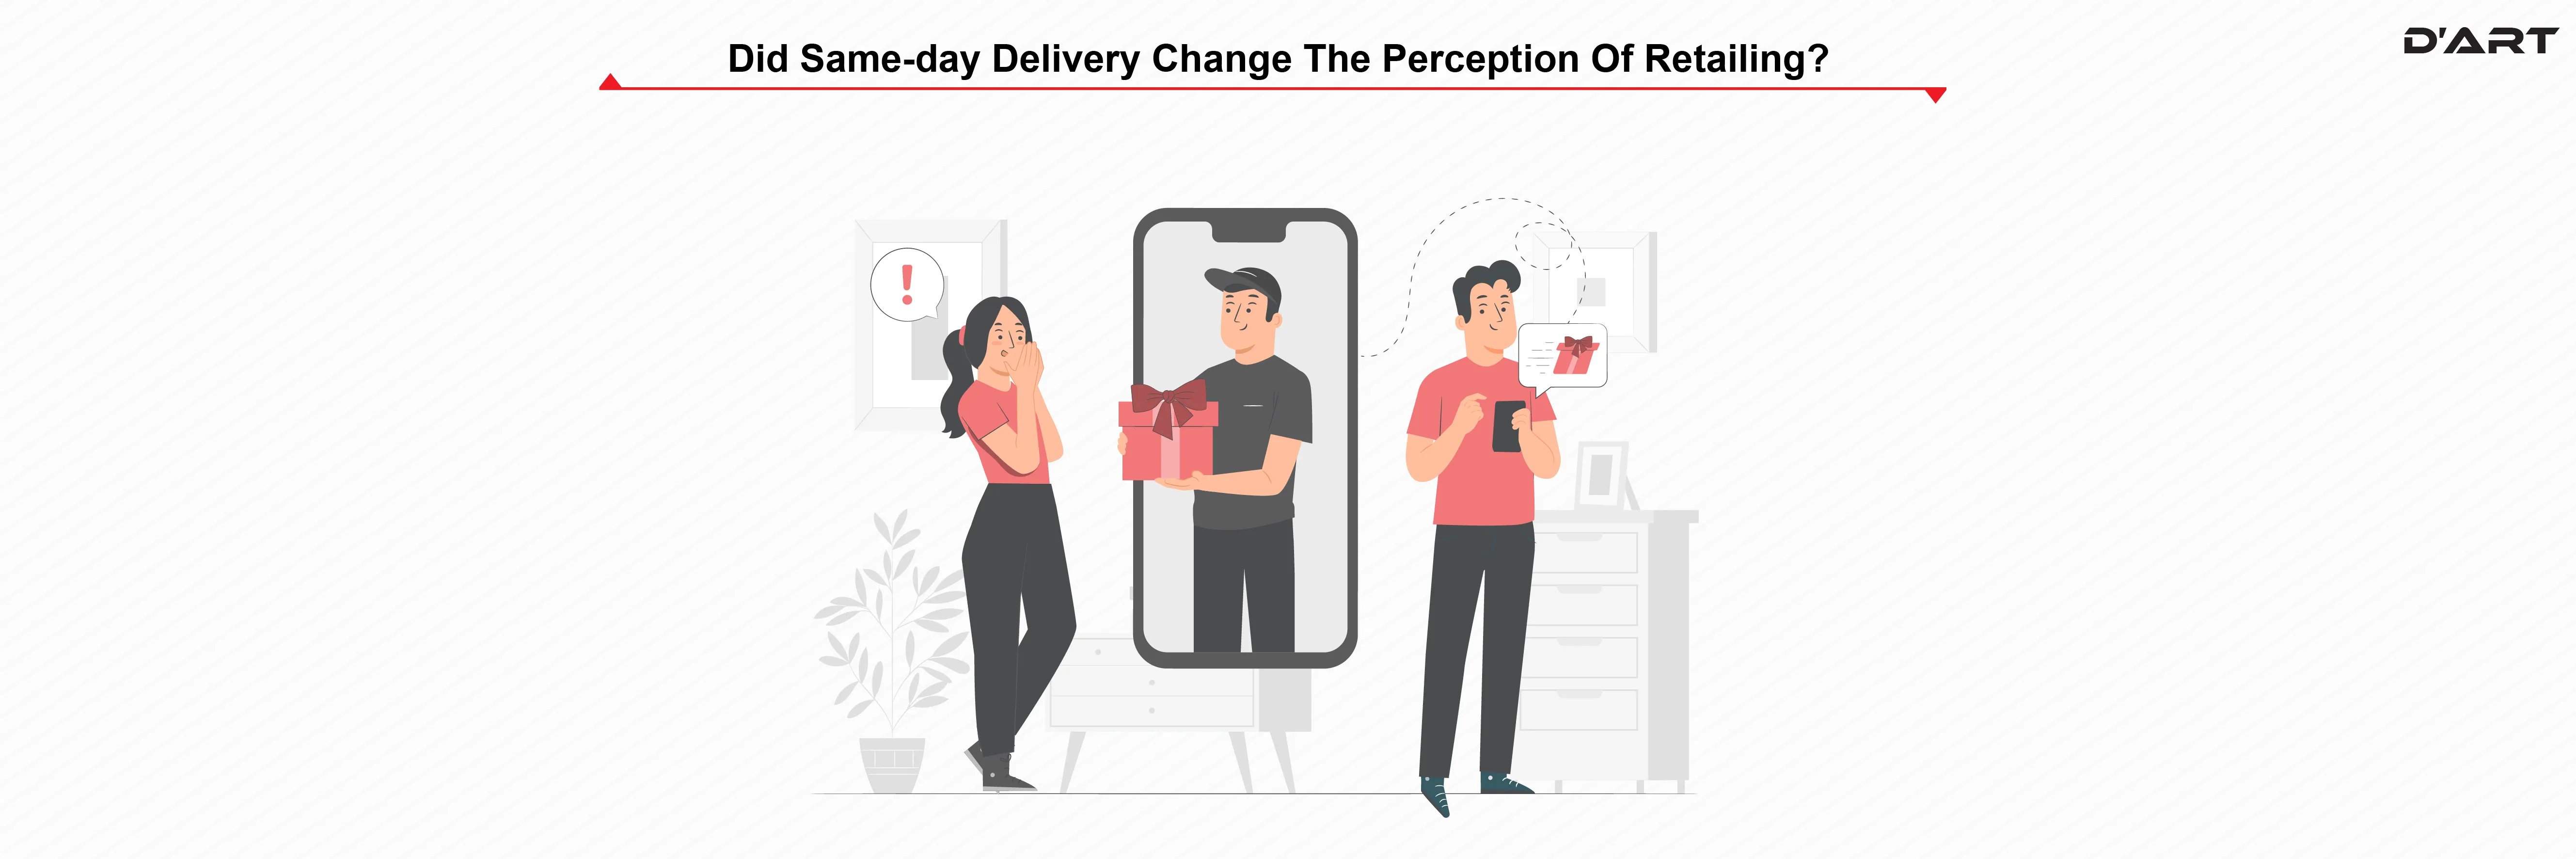 Did same day delivery change the perception of retailing